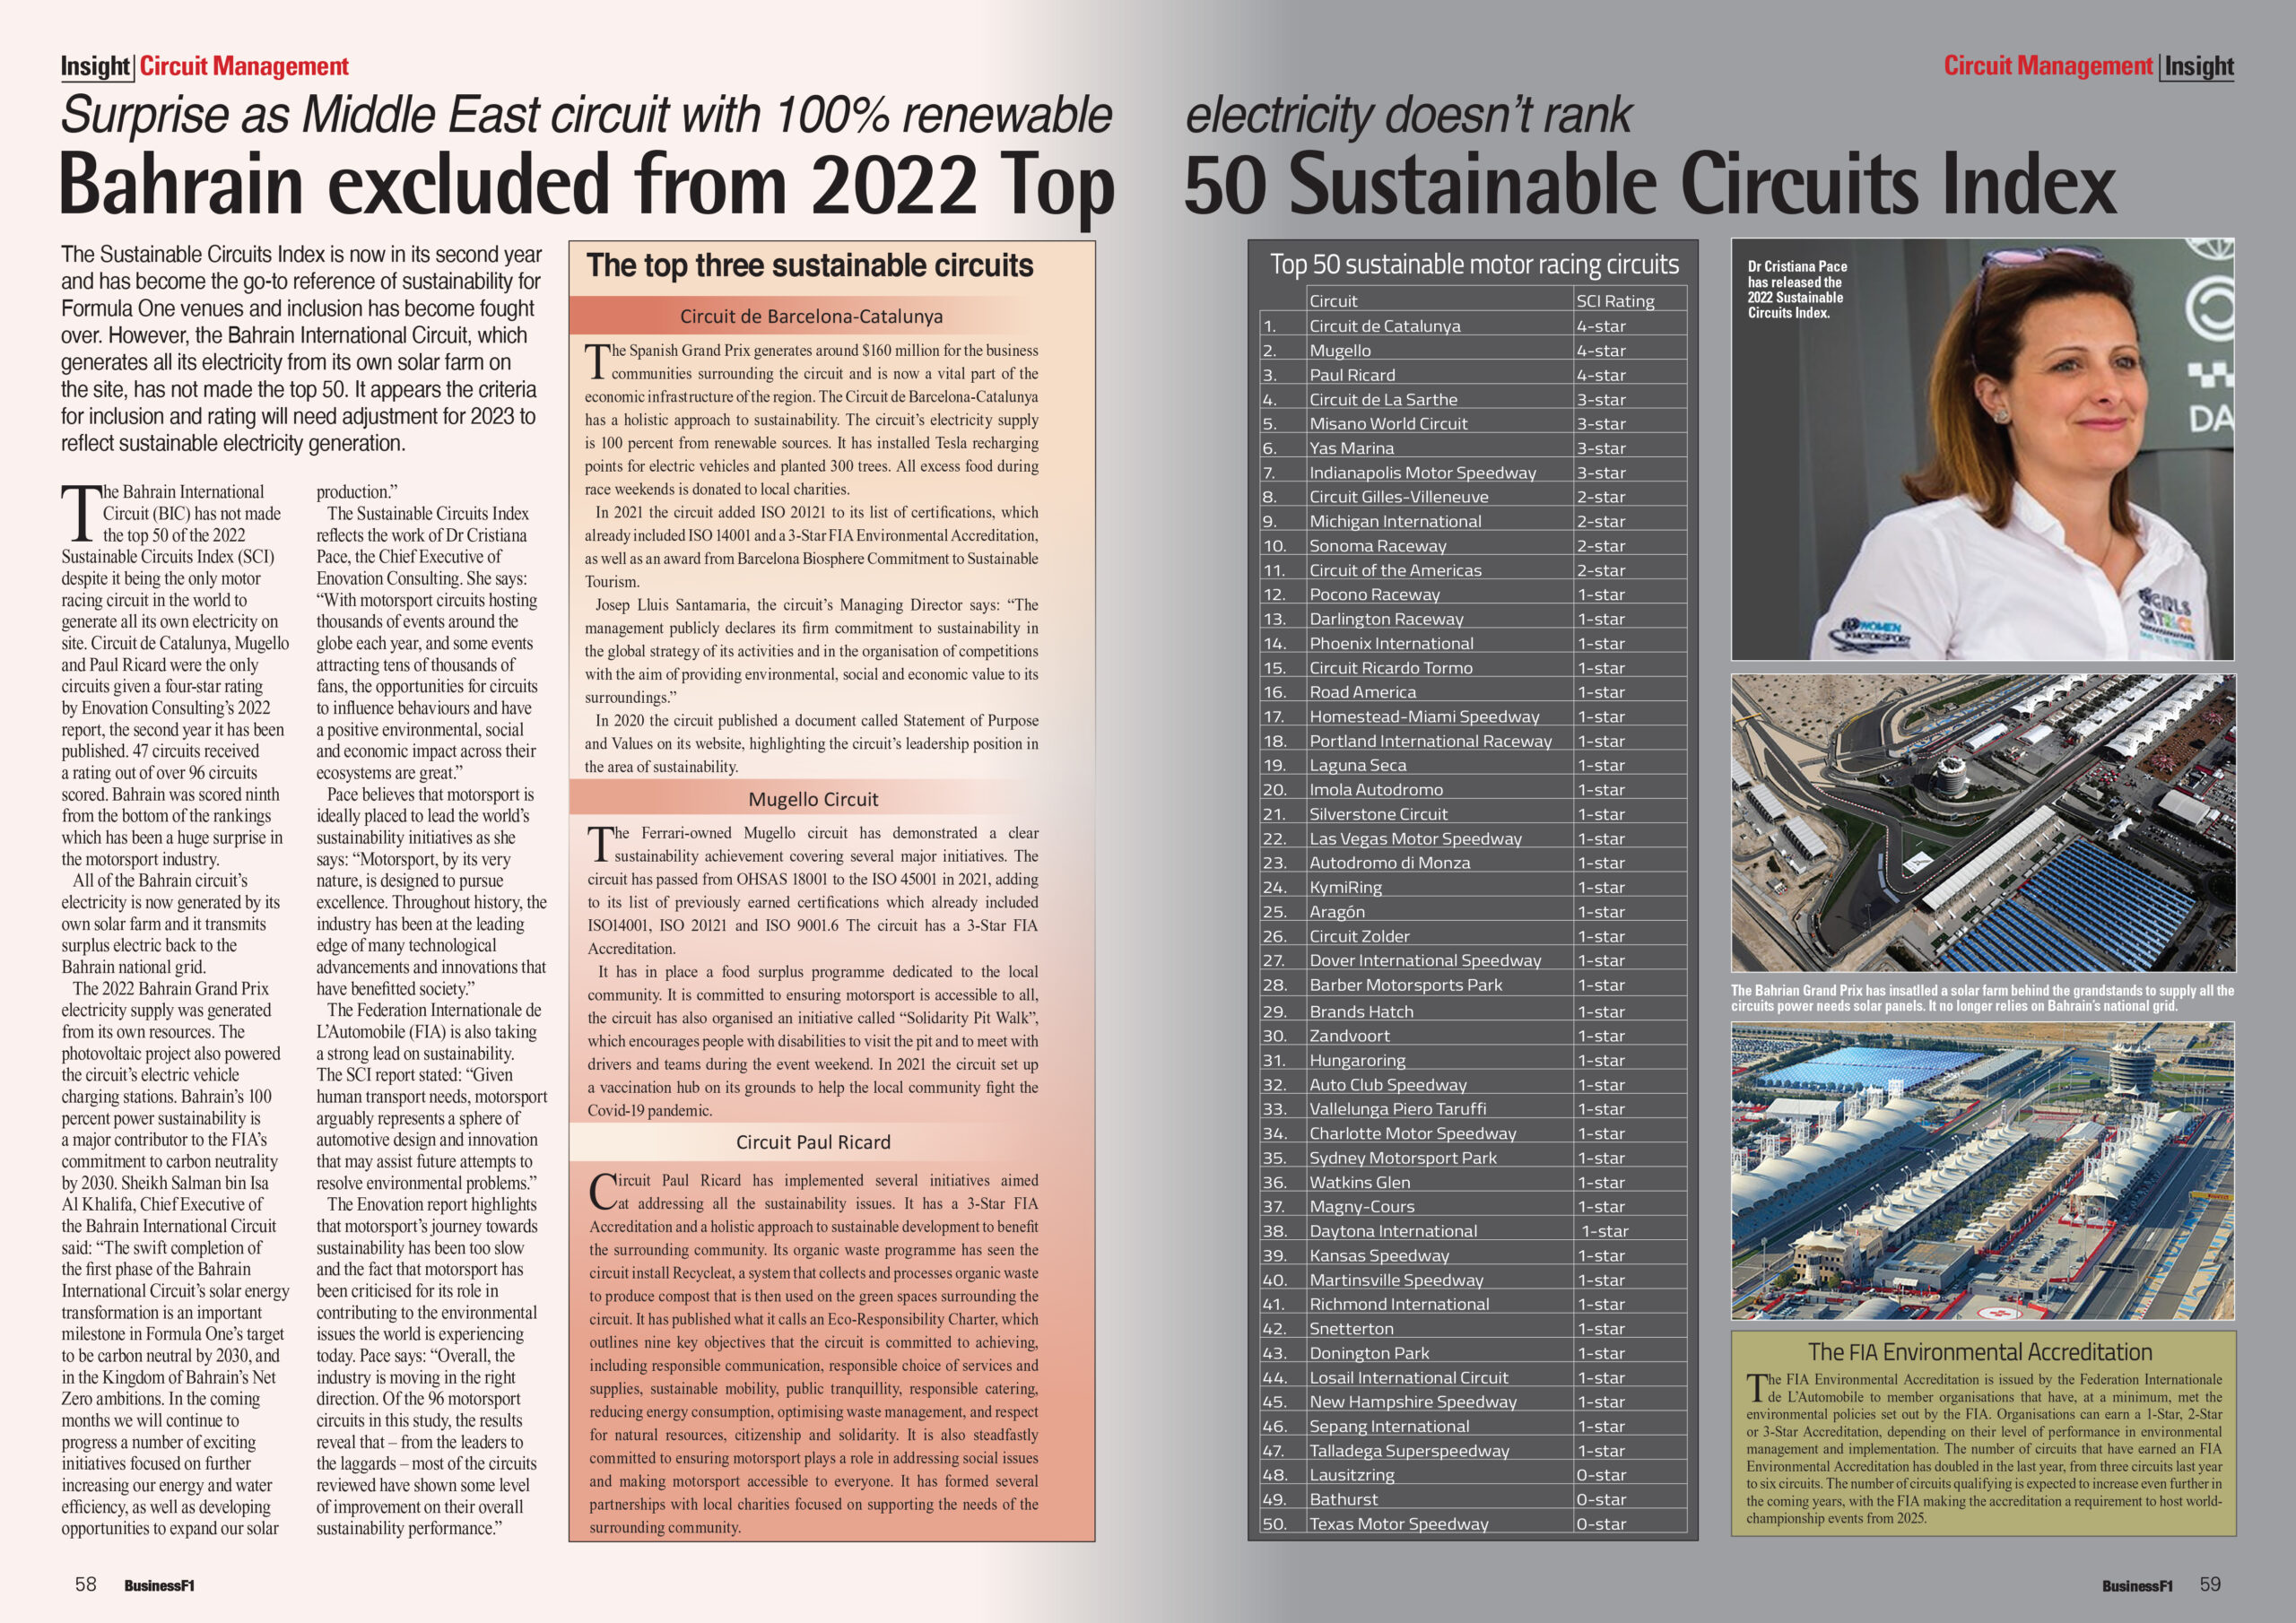 58_INSIGHT_Sustainable Circuits_NOV_2022